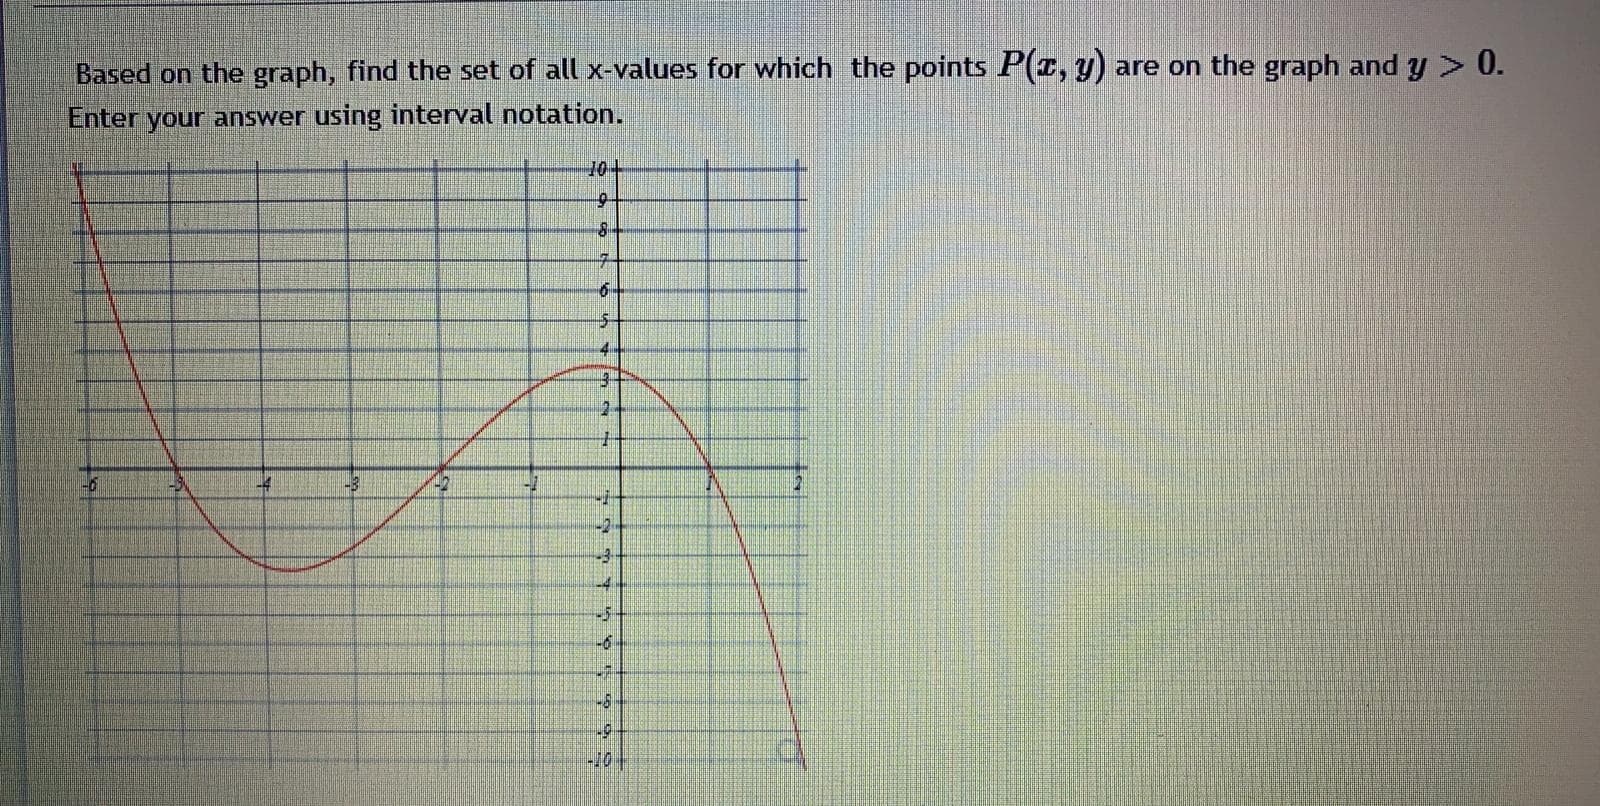 Based on the graph, find the set of all x-values for which the points P(T, y) are on the graph and y > 0.
Enter your answer using interval notation.
10+
6-
4
2.
-6
-4
-5
-6
-8
-10
